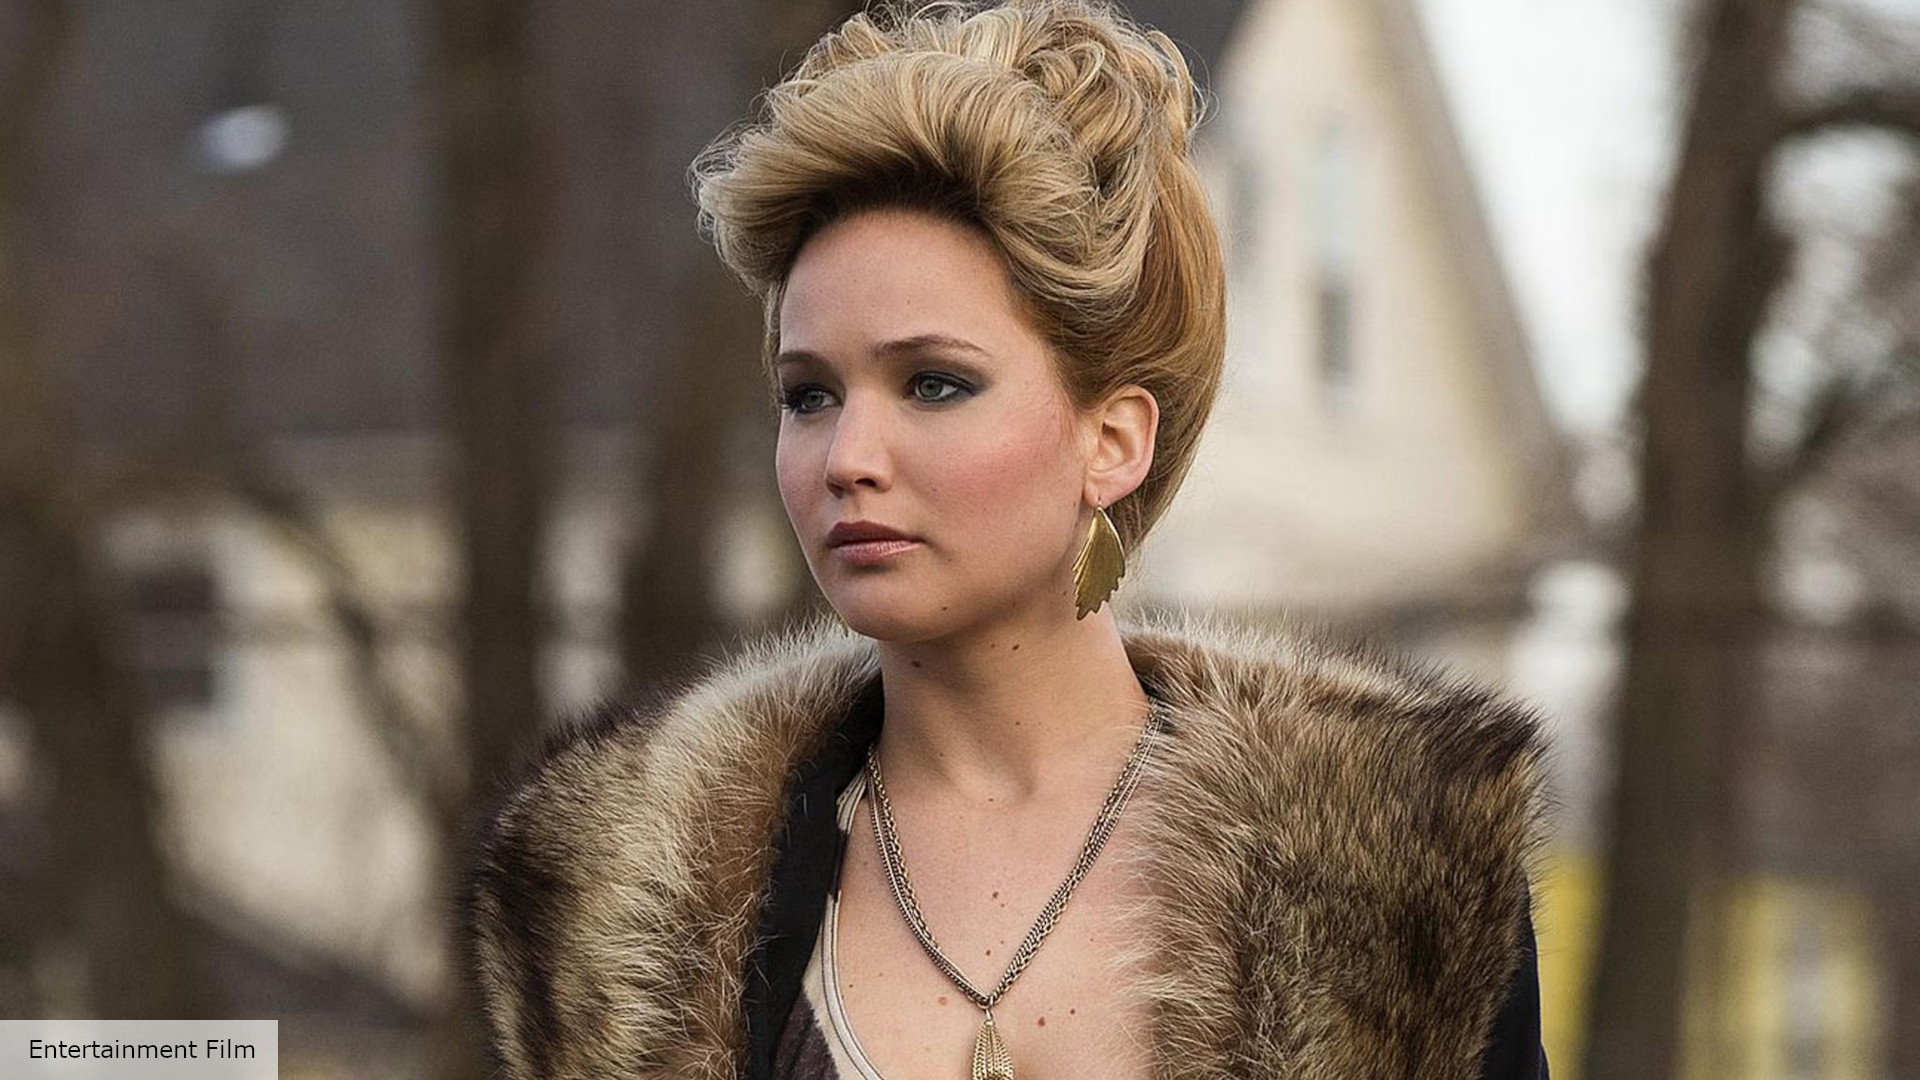 Christian Bale taught Jennifer Lawrence an important lesson in acting